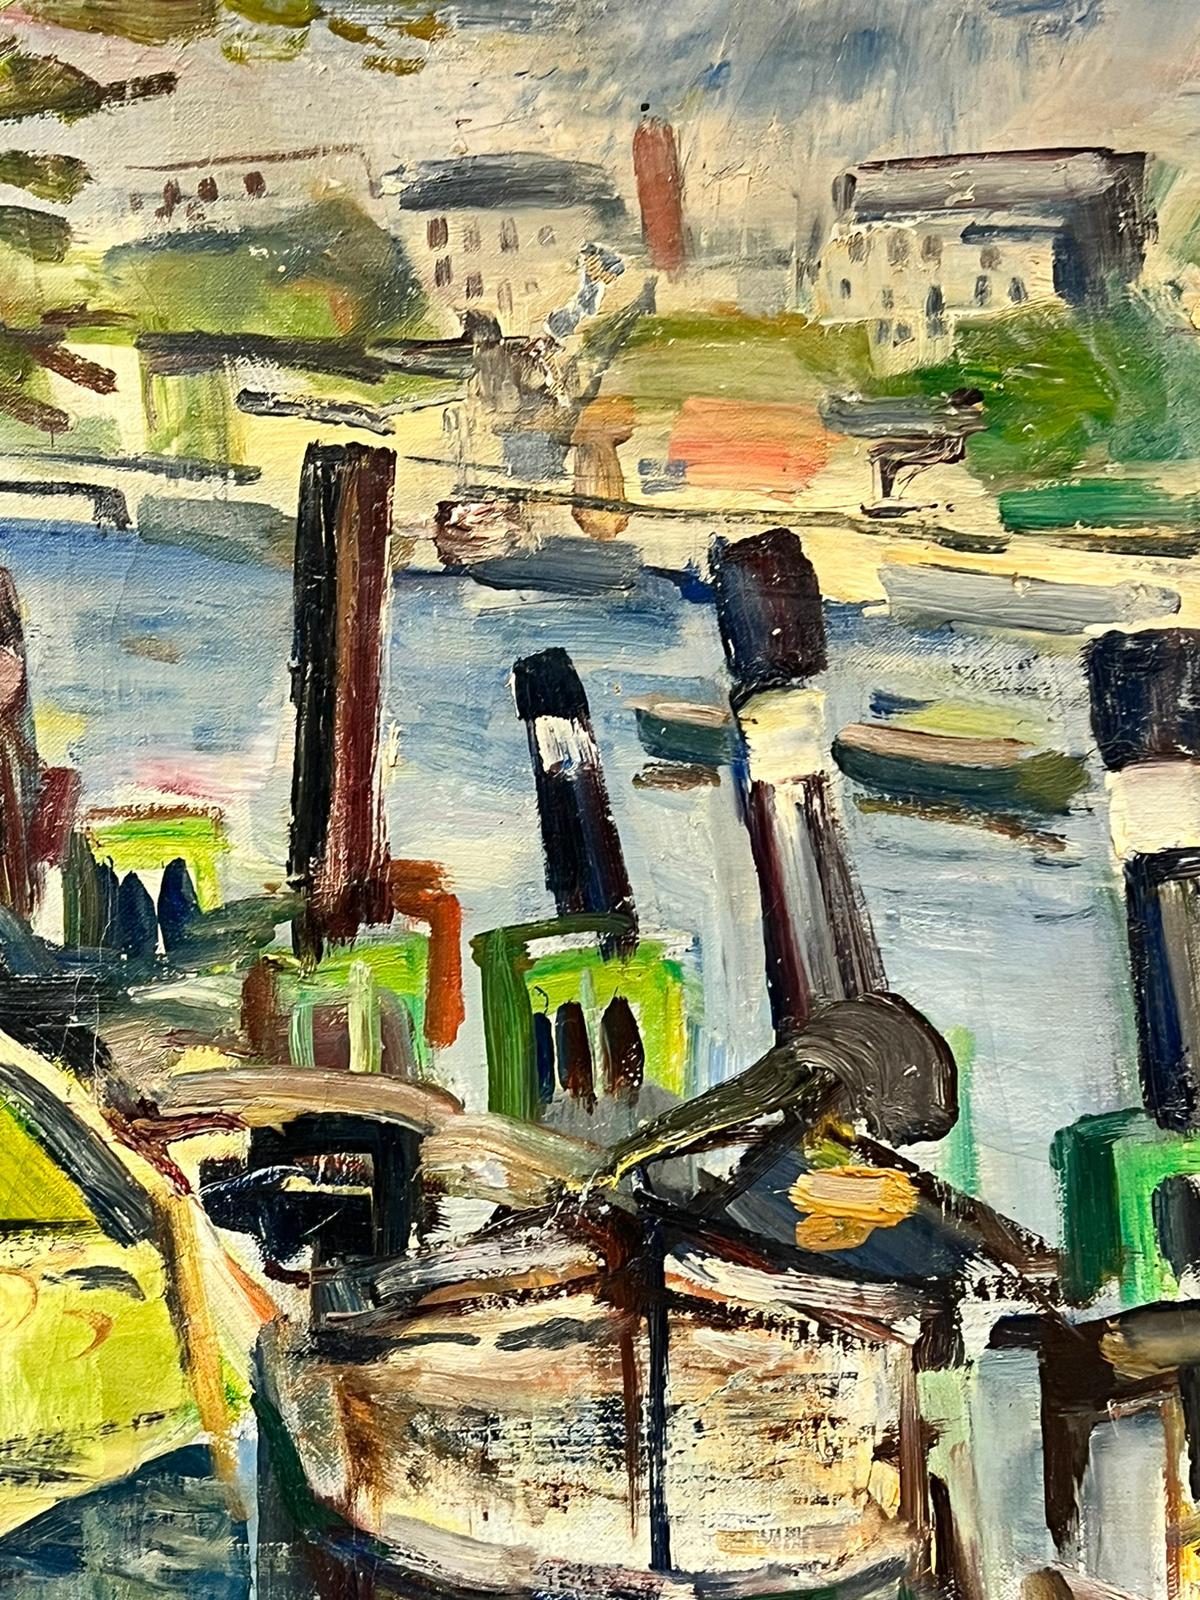 The Banks of the Seine
signed by Édouard Righetti (1924-2001)
dated 1959 or 1960
framed oil painted on canvas, beautifully painted.
very good condition
framed: 30 x 23 inches
canvas: 29 x 22.5 inches
provenance: all the paintings we have for sale by